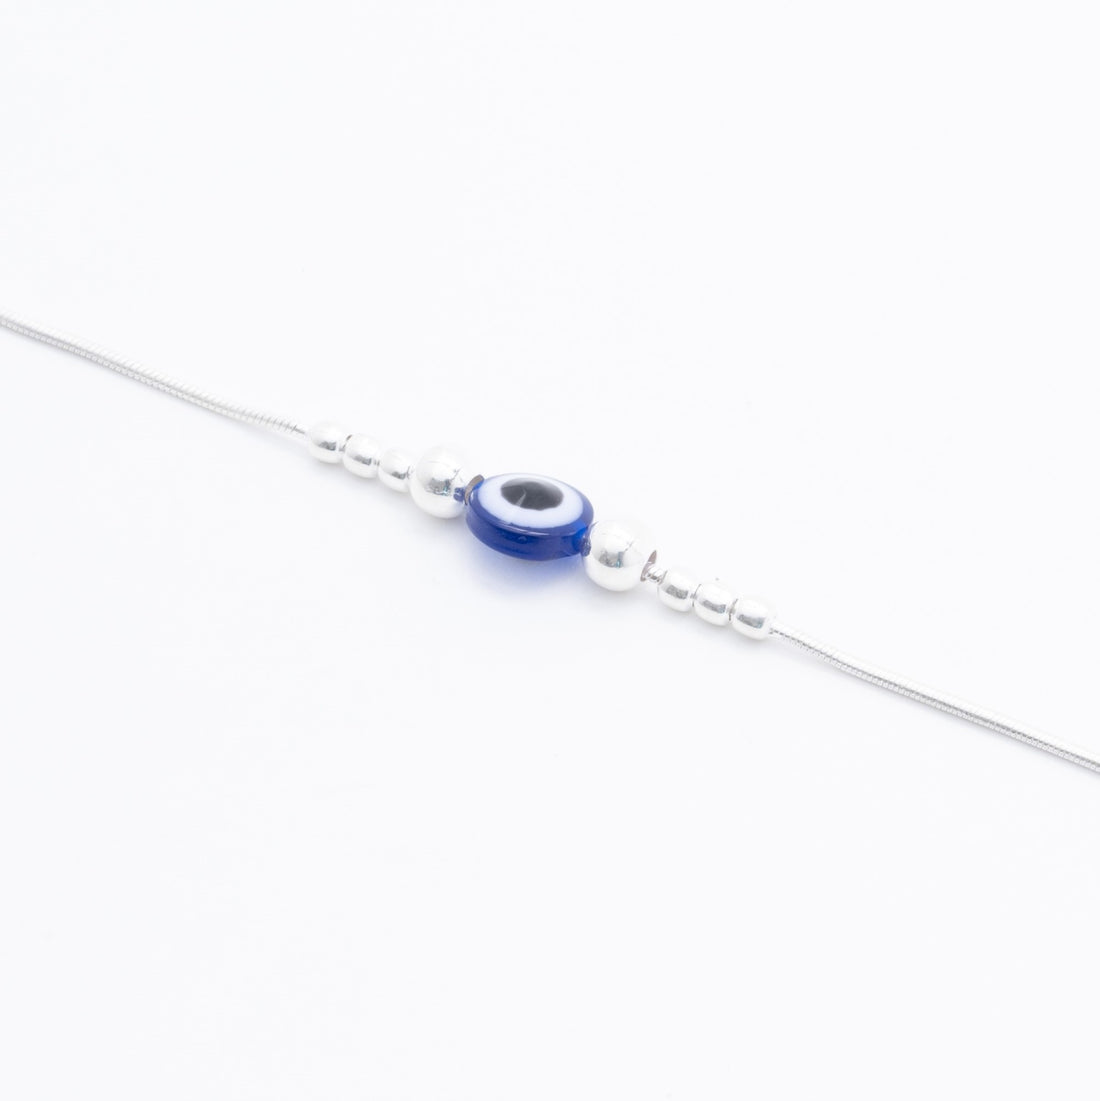 Powerful Evil Eye Silver Anklets for Women